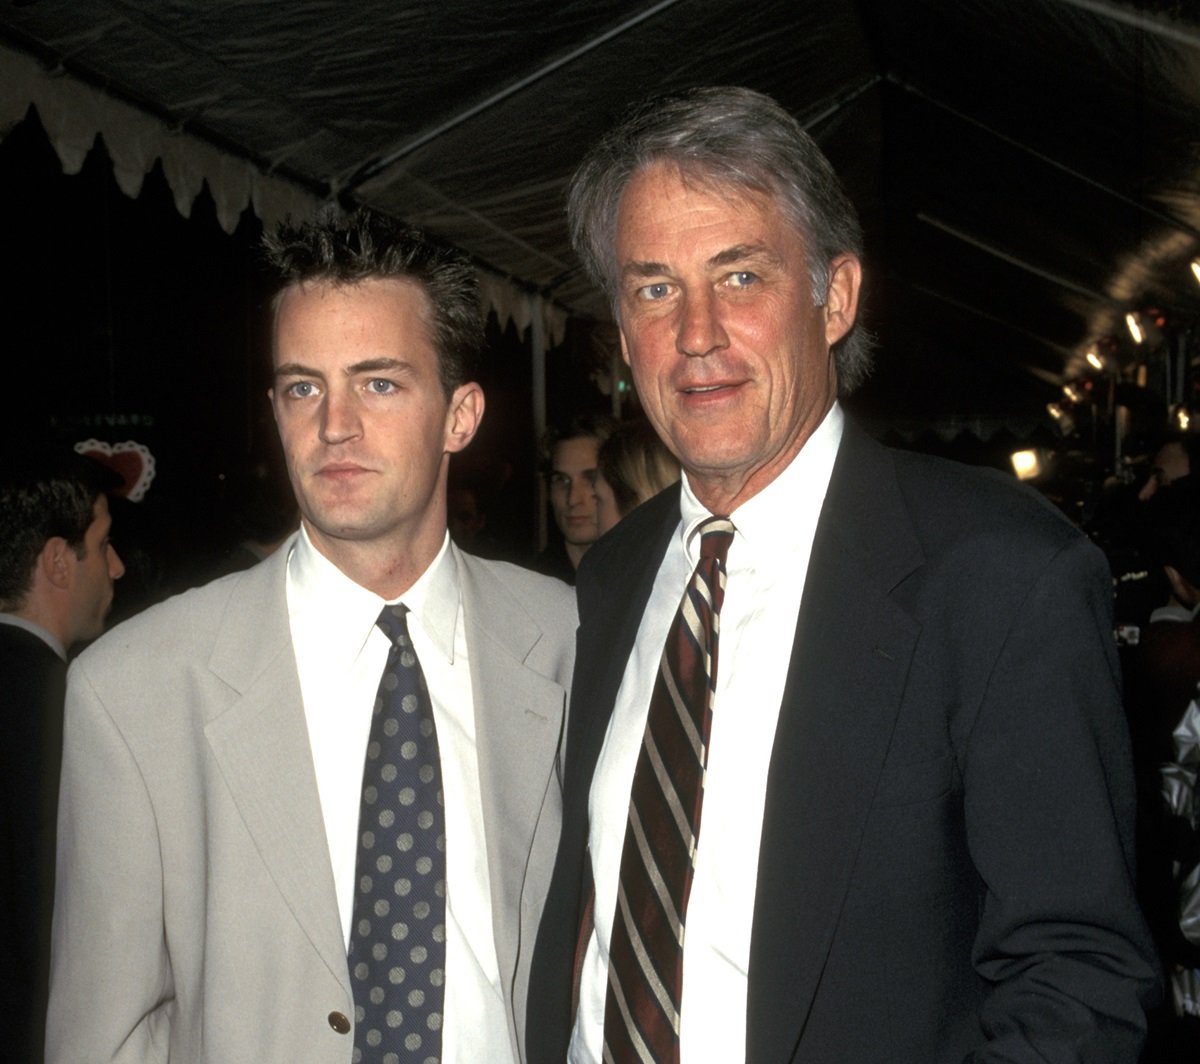 Matthew Perry with his father, John Bennett Perry in 2002